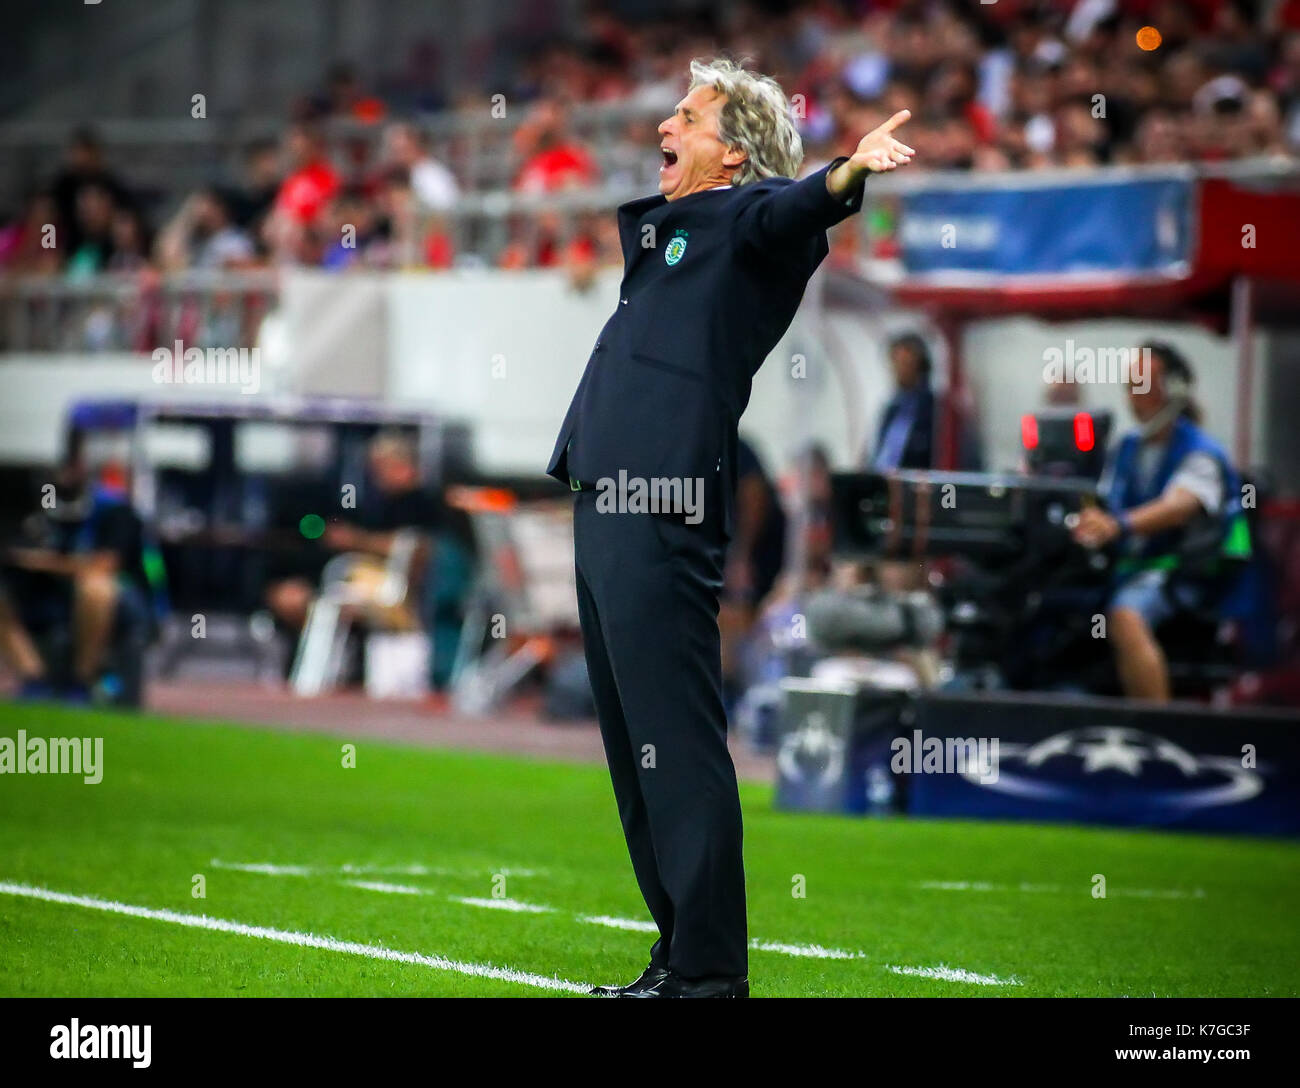 Piraeus, Greece - Sempteber 12, 2017: Coach of Sporting Jorge Jesus during the UEFA Champions League game between Olympiacos vs Sporting CP at Georgio Stock Photo